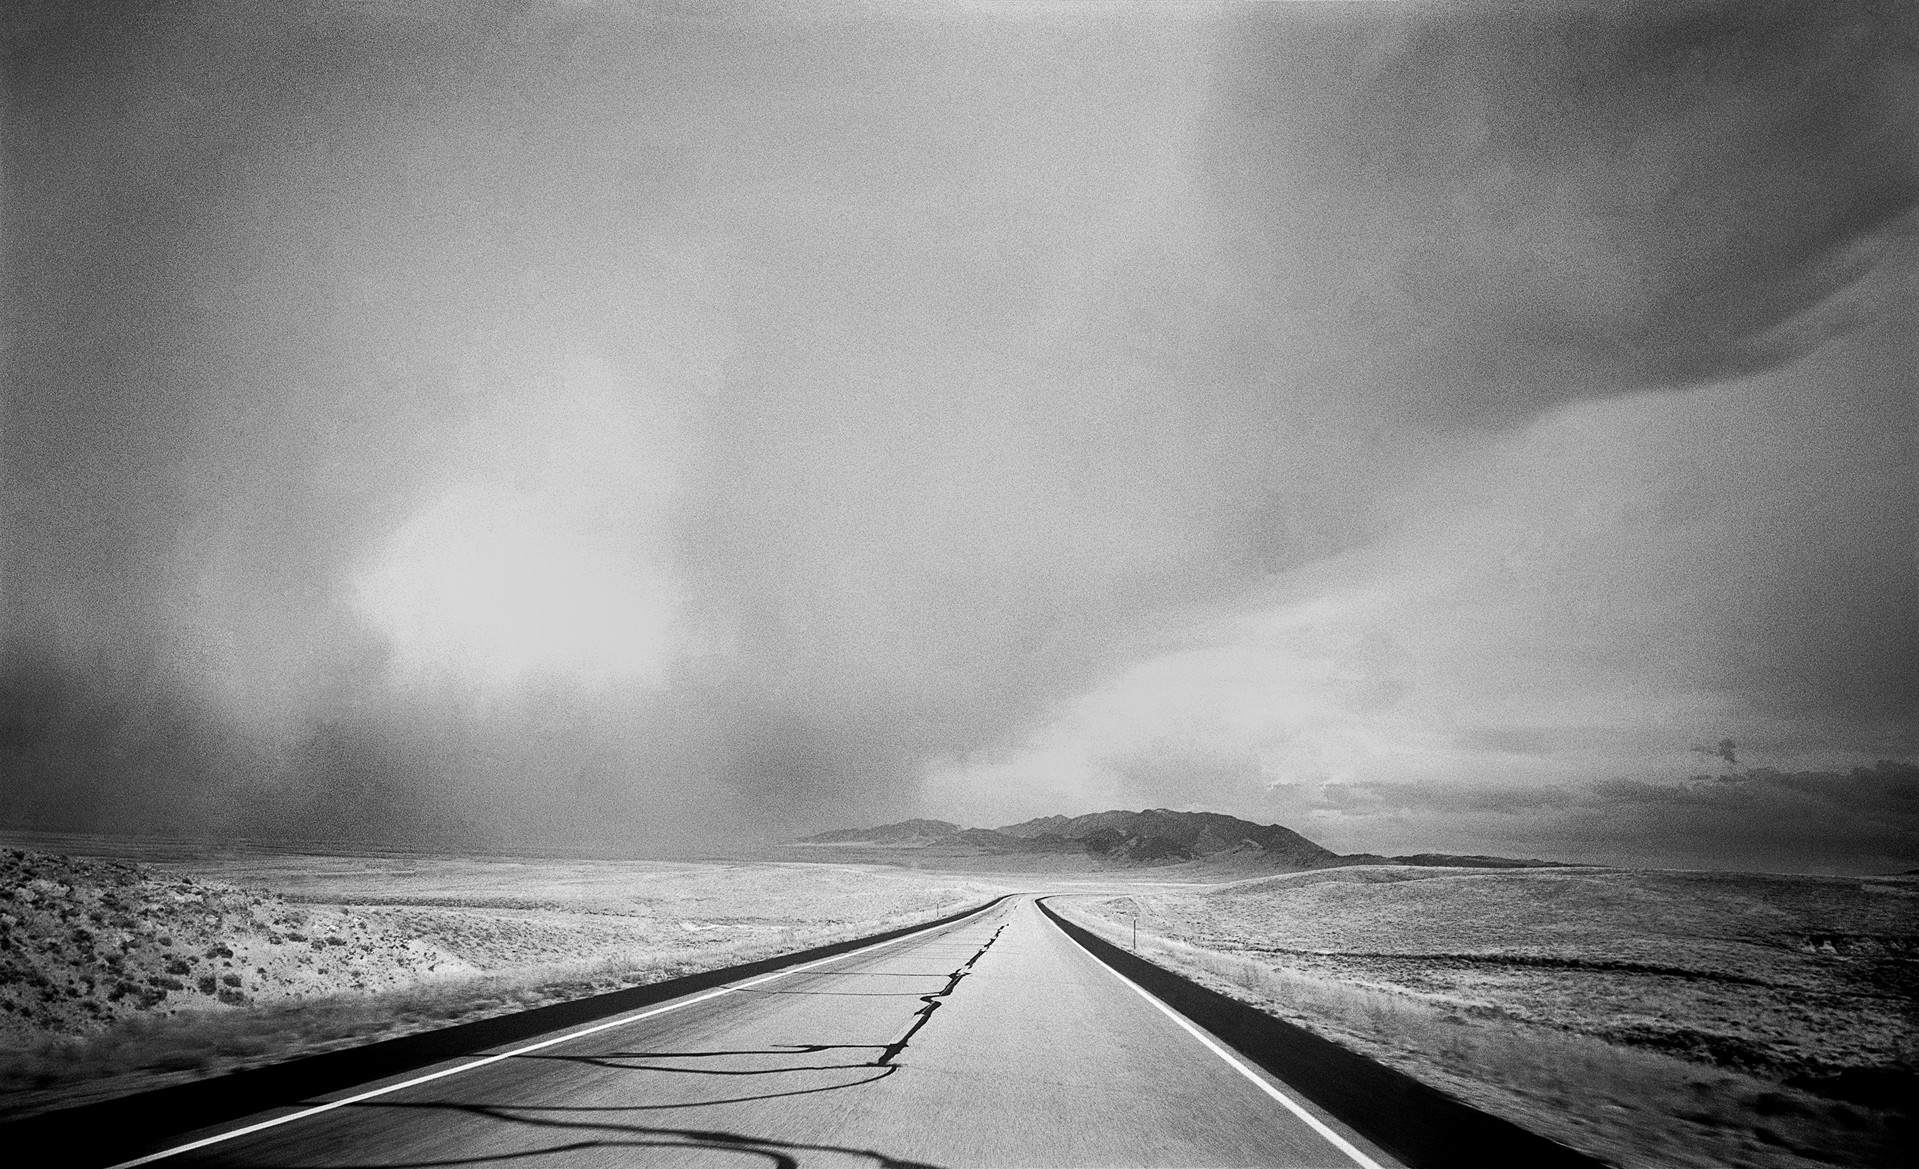 Storm, Highway 287, Near Devils Gap, Wyoming by Lawrence McFarland